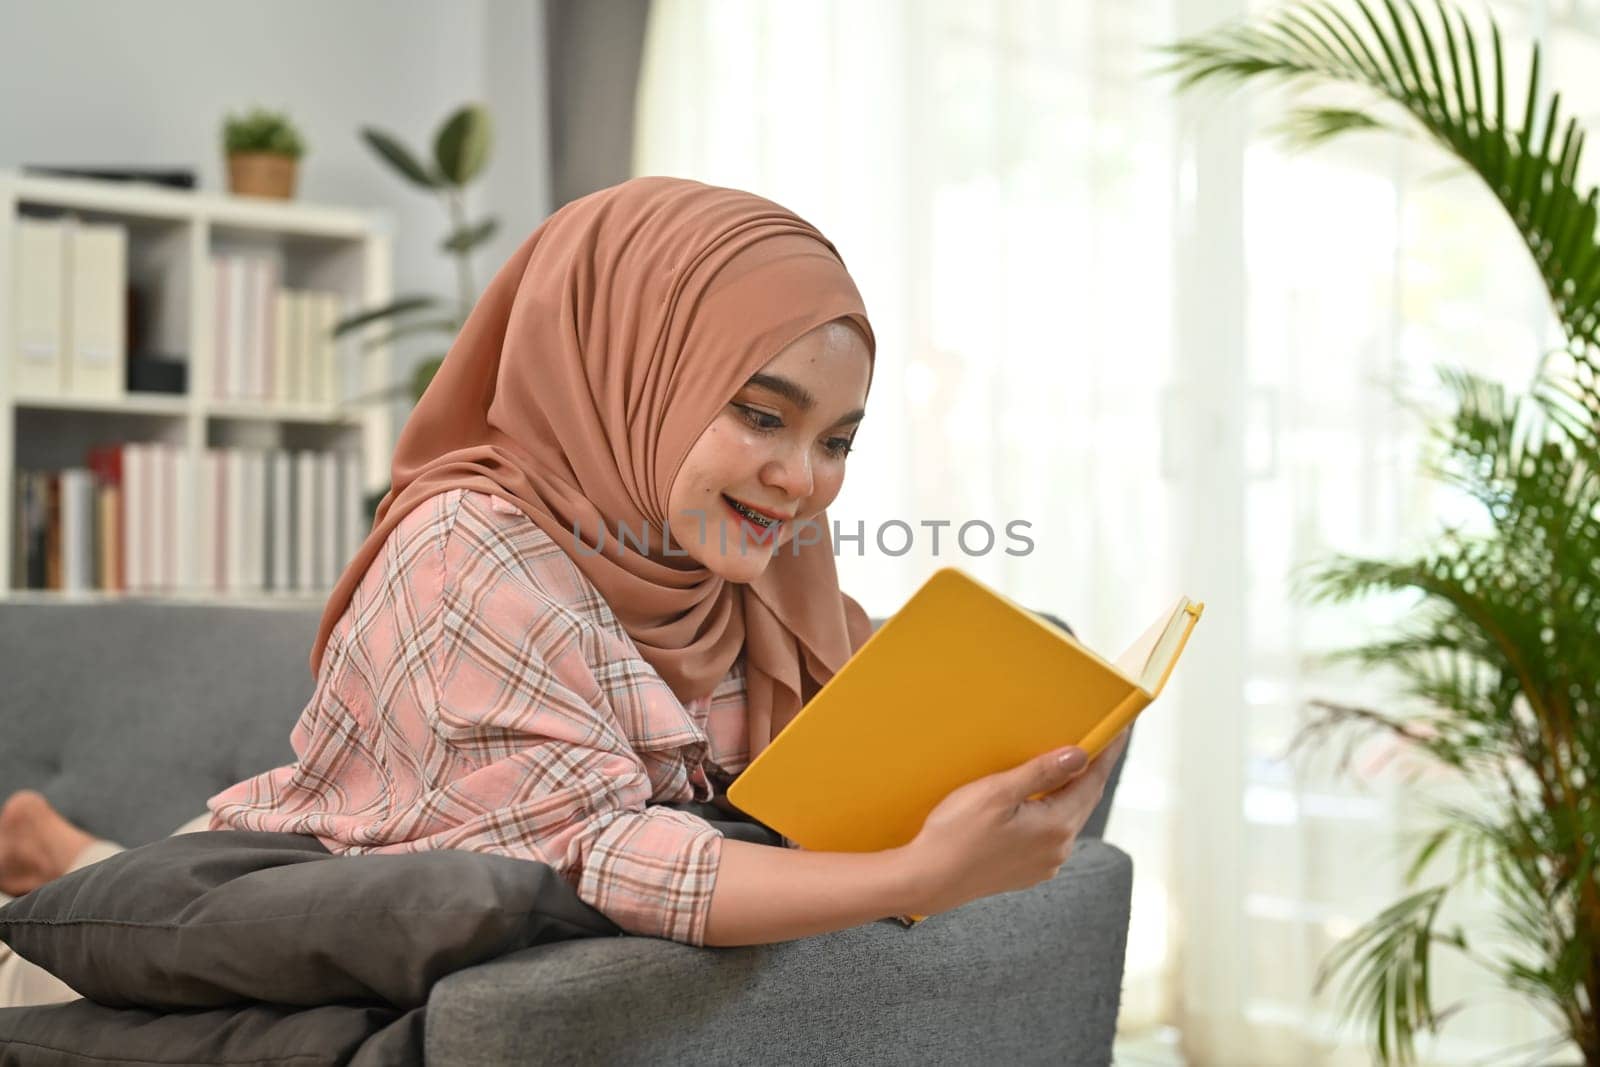 Happy young Muslim woman in hijab and casual clothes laying on couch and reading a book. People and leisure activity concept.